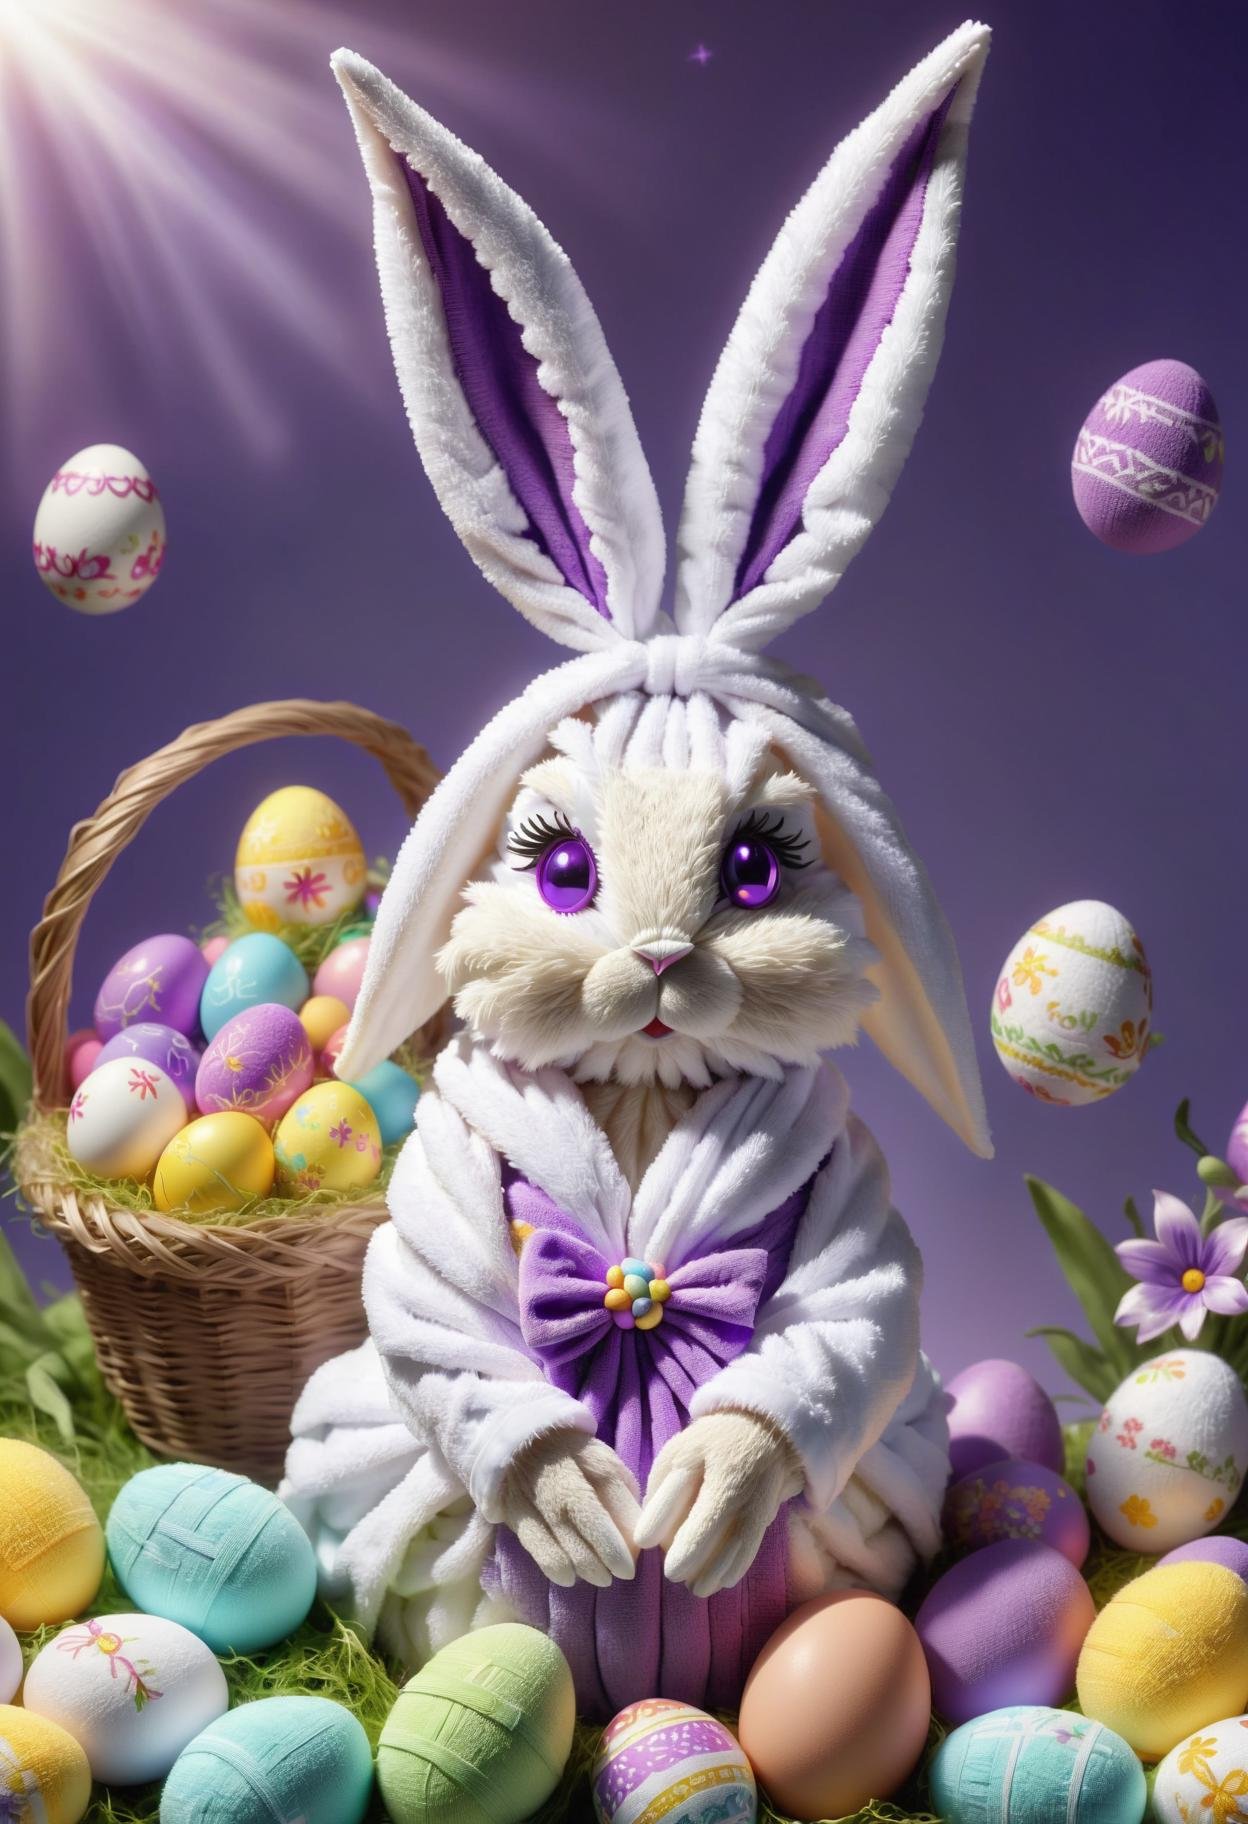 DonMT0w31XL towel, female  easter bunny, anthropomorphic hare, colorful eggs, festive clothing and accessories, basket filled with easter eggs, fertility, rebirth, spring, cheerful, interwoven,canopy,innate,collaboration,nocturnal,customs,supportive , purple <lora:DonMT0w31XL-000010:0.8>